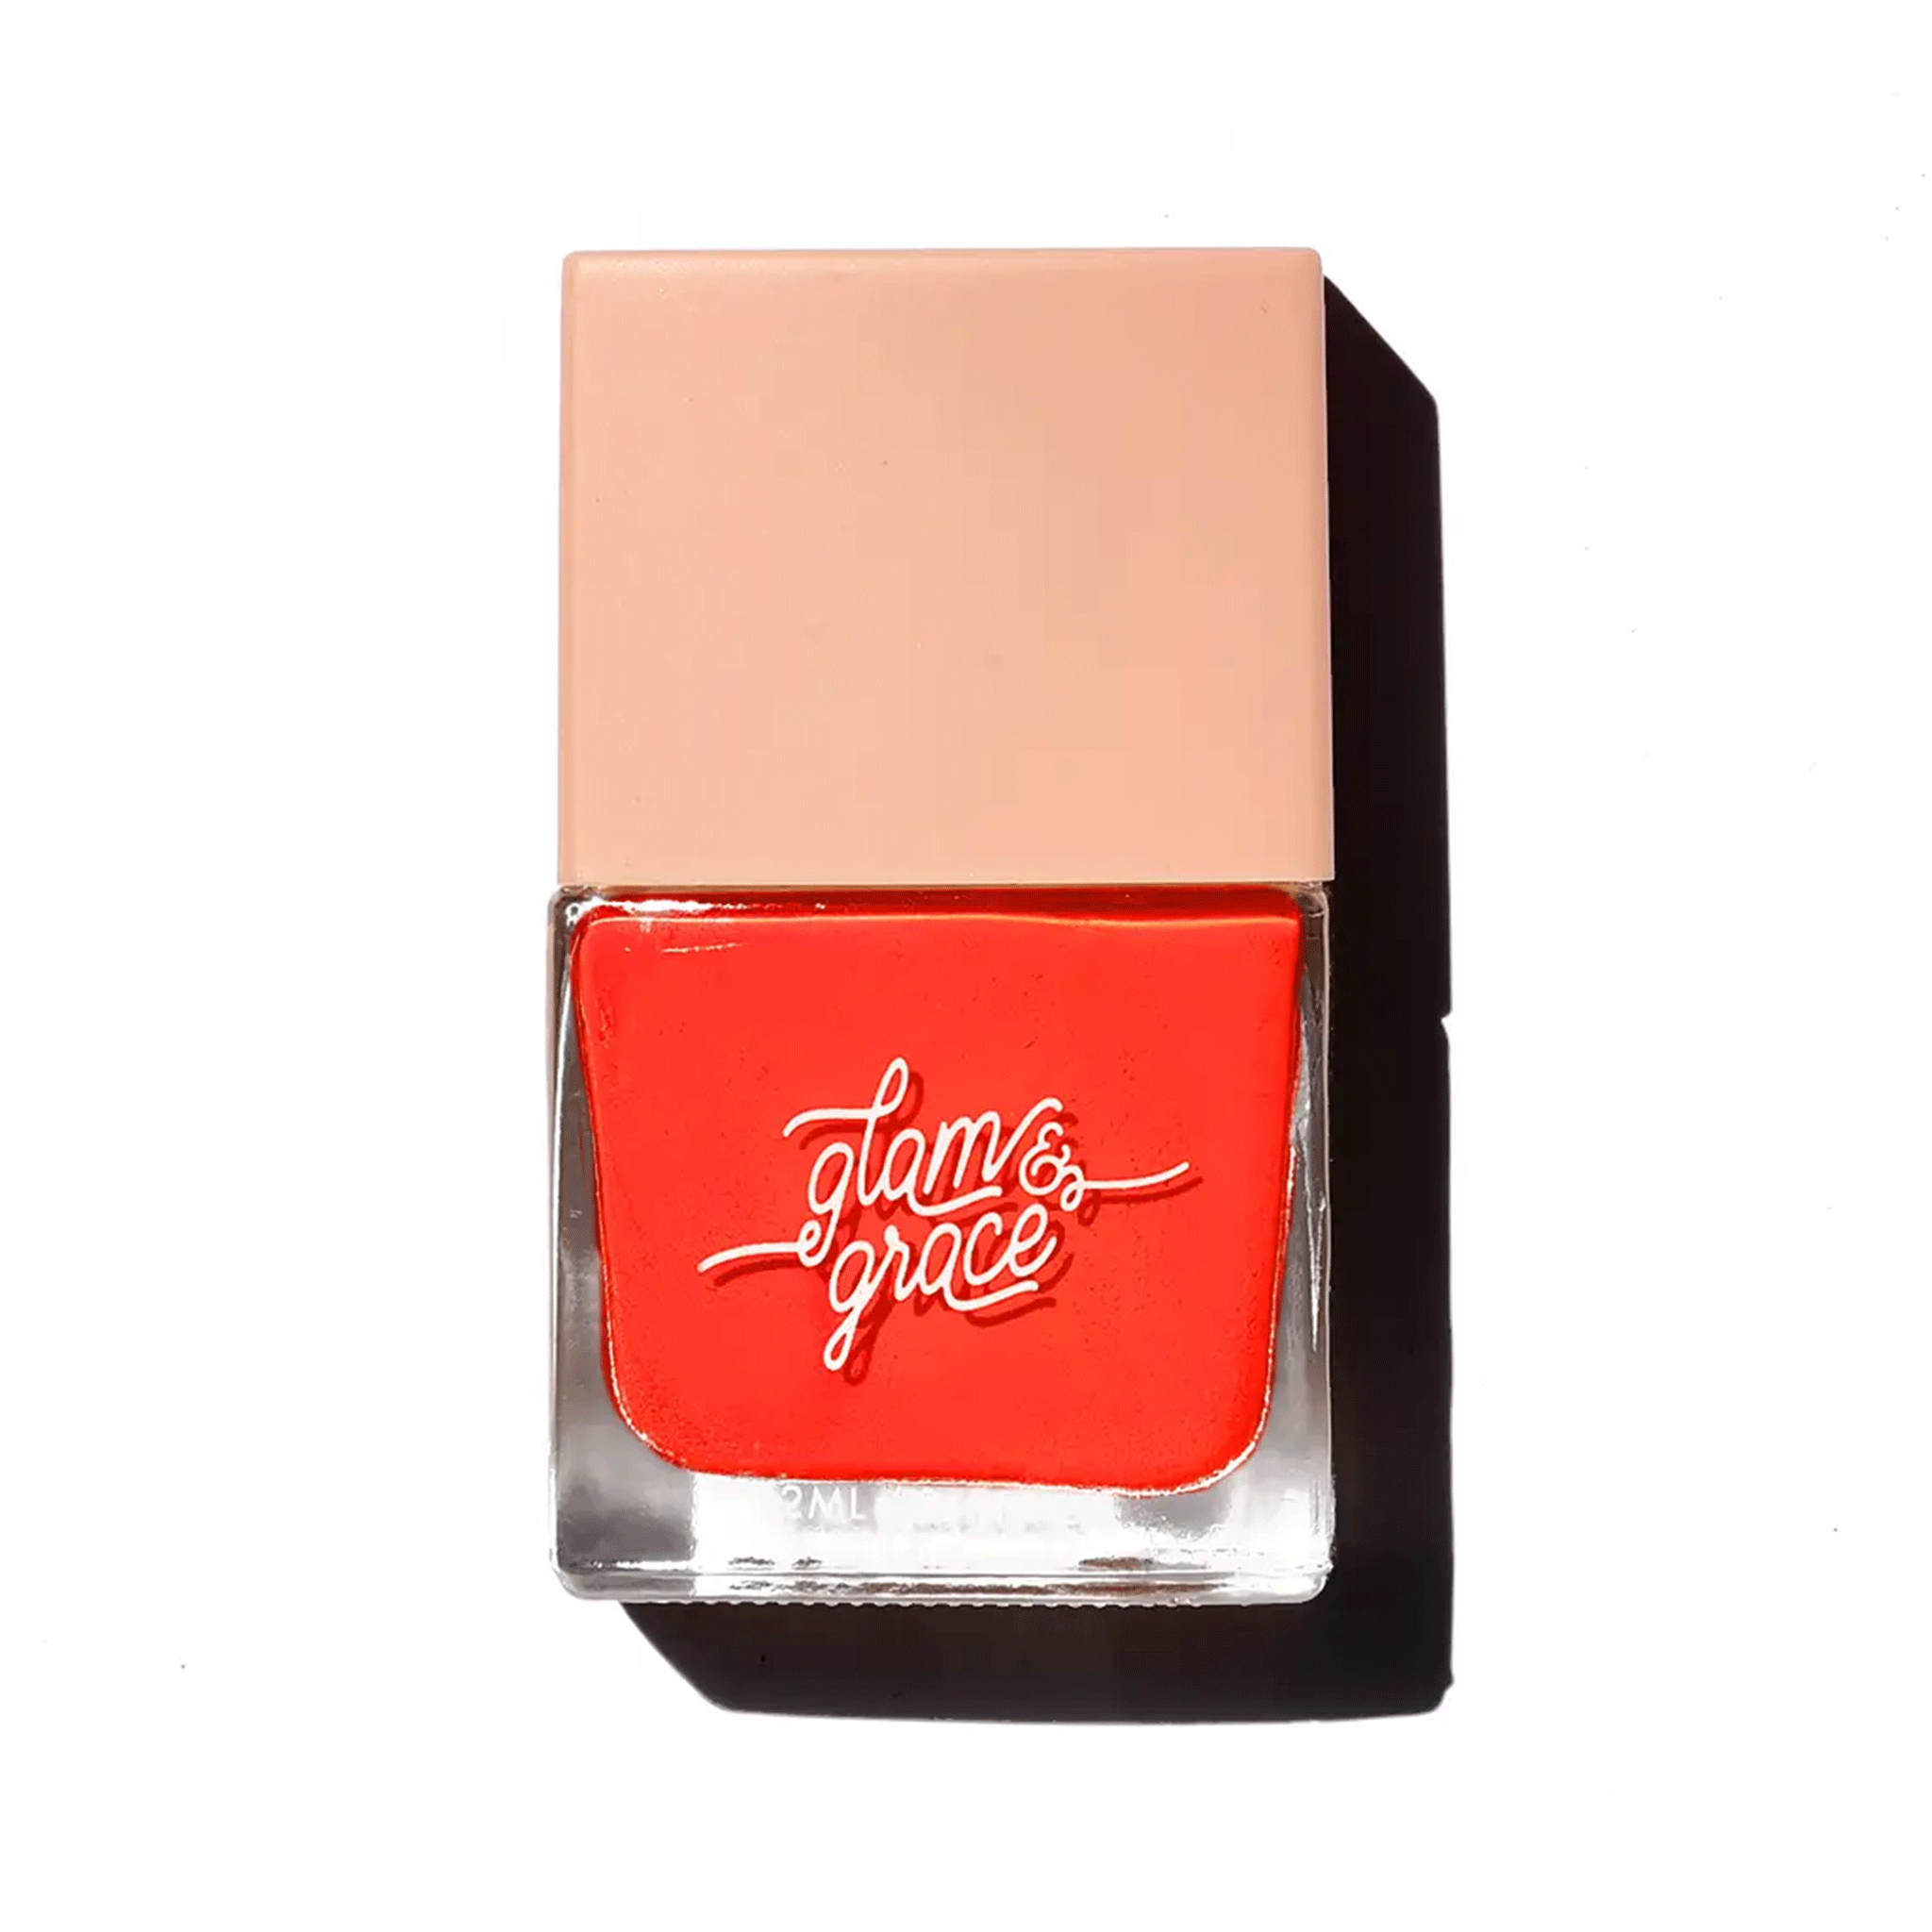 On a white background is a red nail polish in a square bottle. 